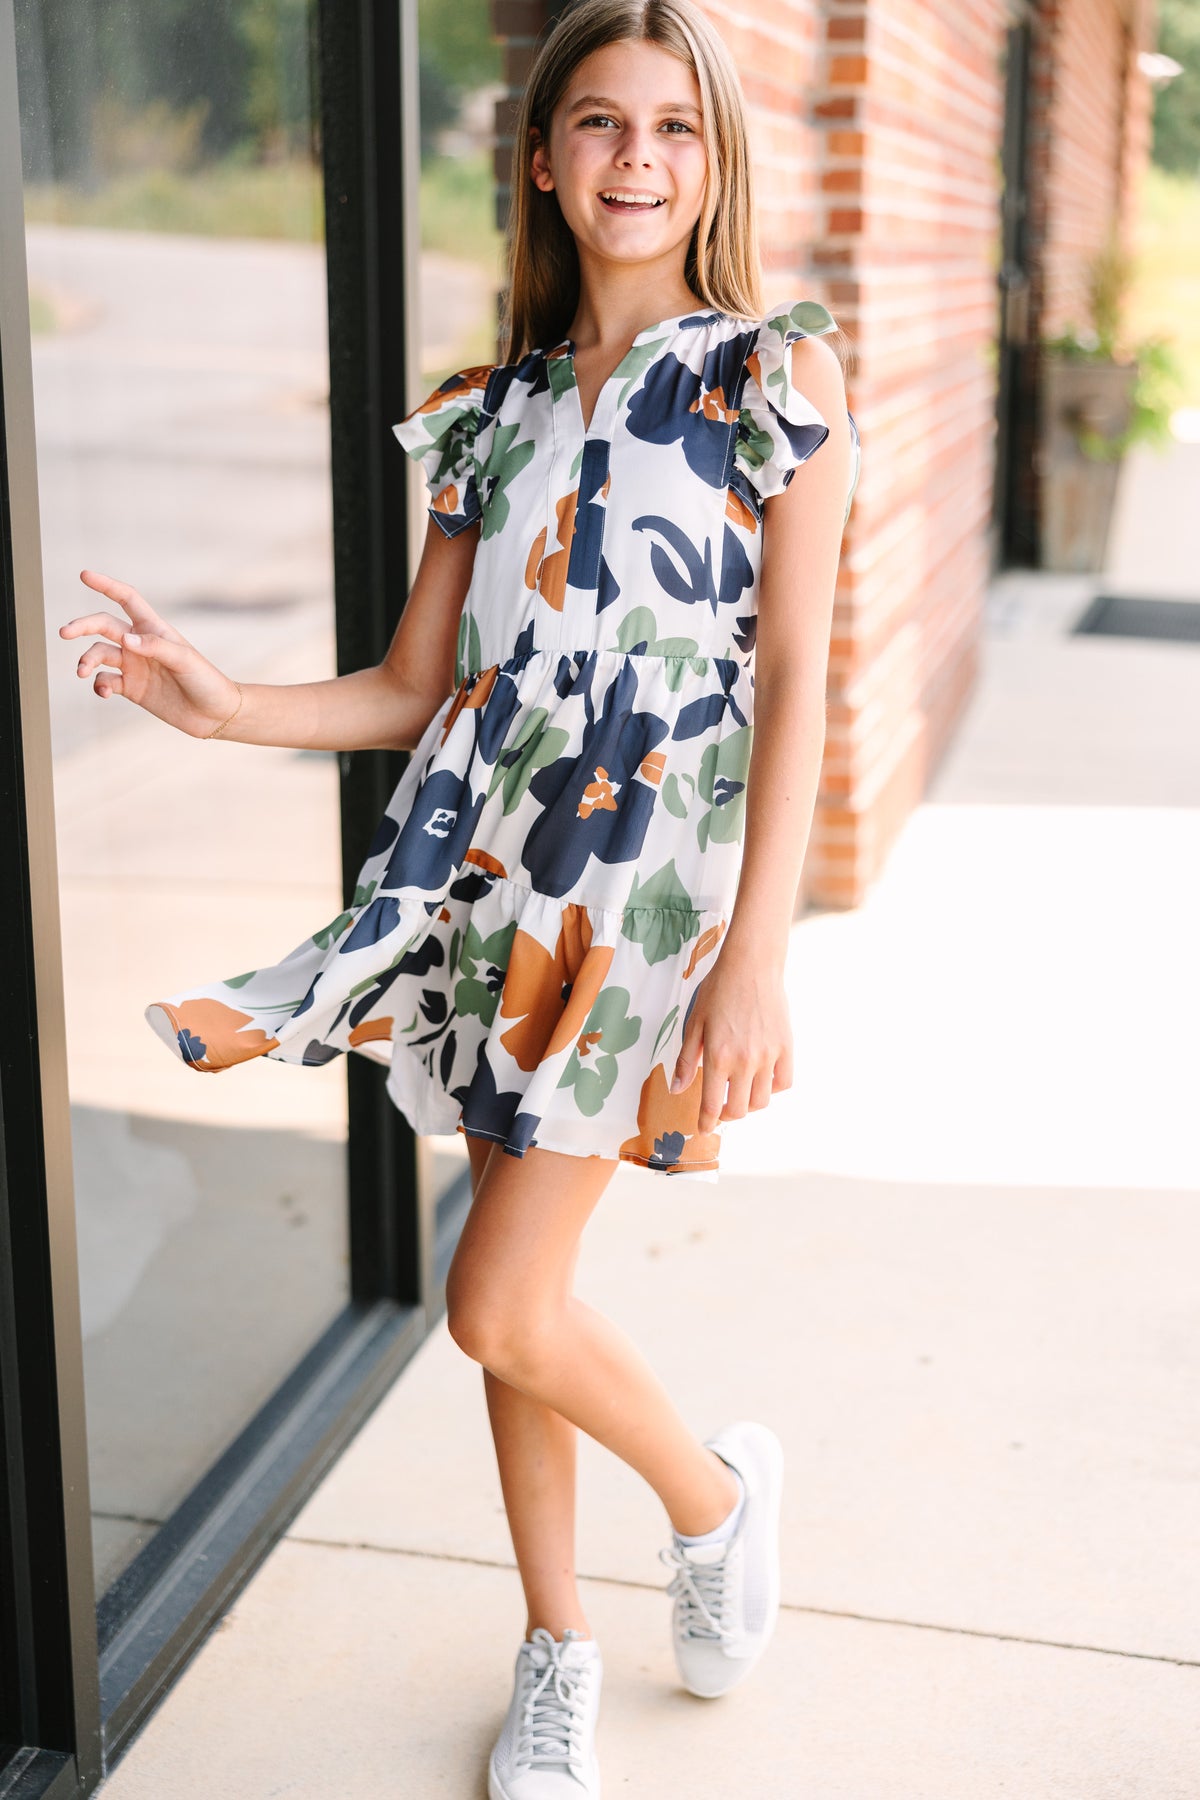 Girls: At This Time Olive Green Floral Dress – Shop the Mint